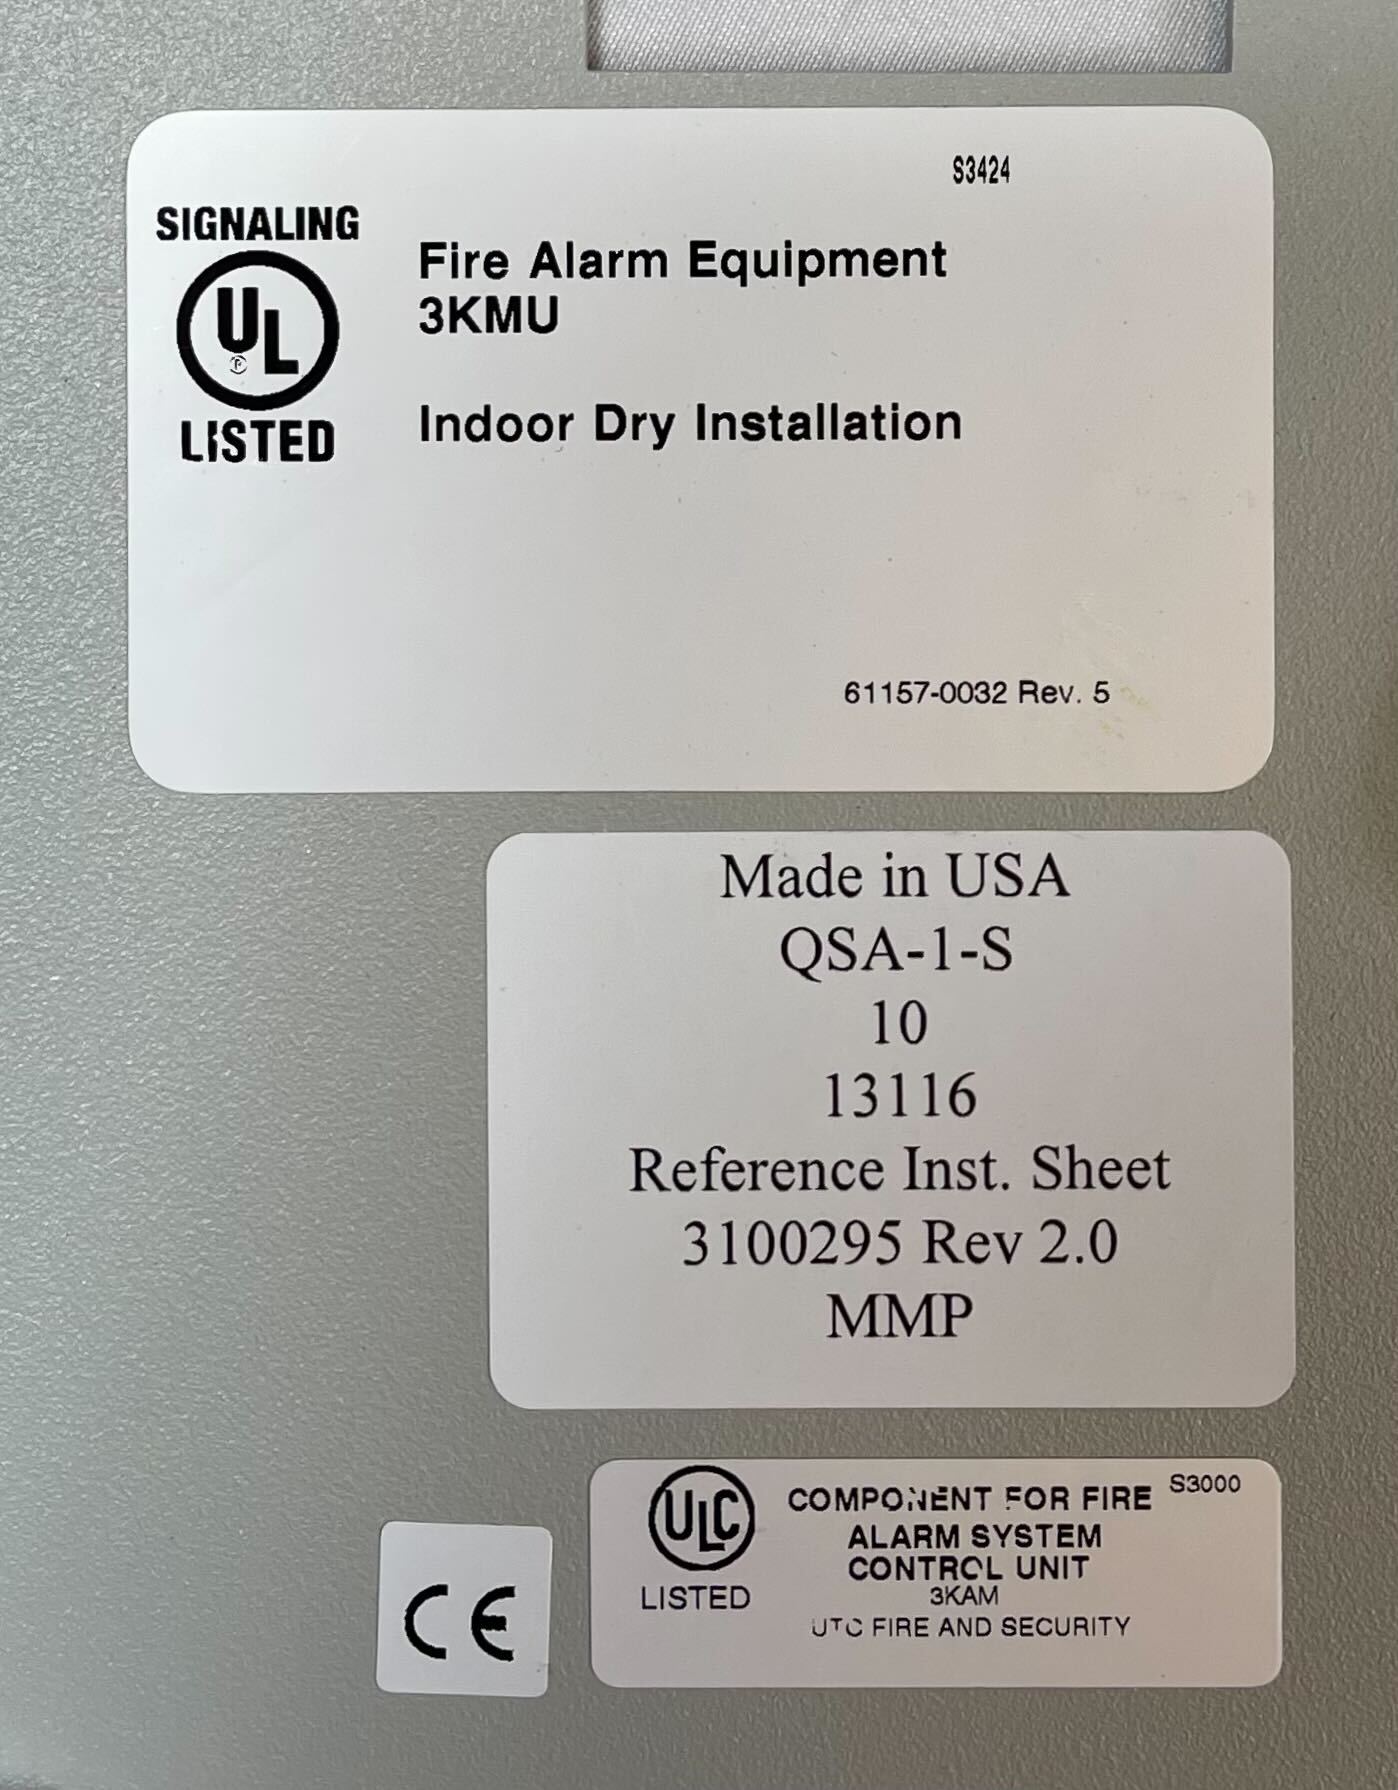 Edwards QSA-1-S - The Fire Alarm Supplier